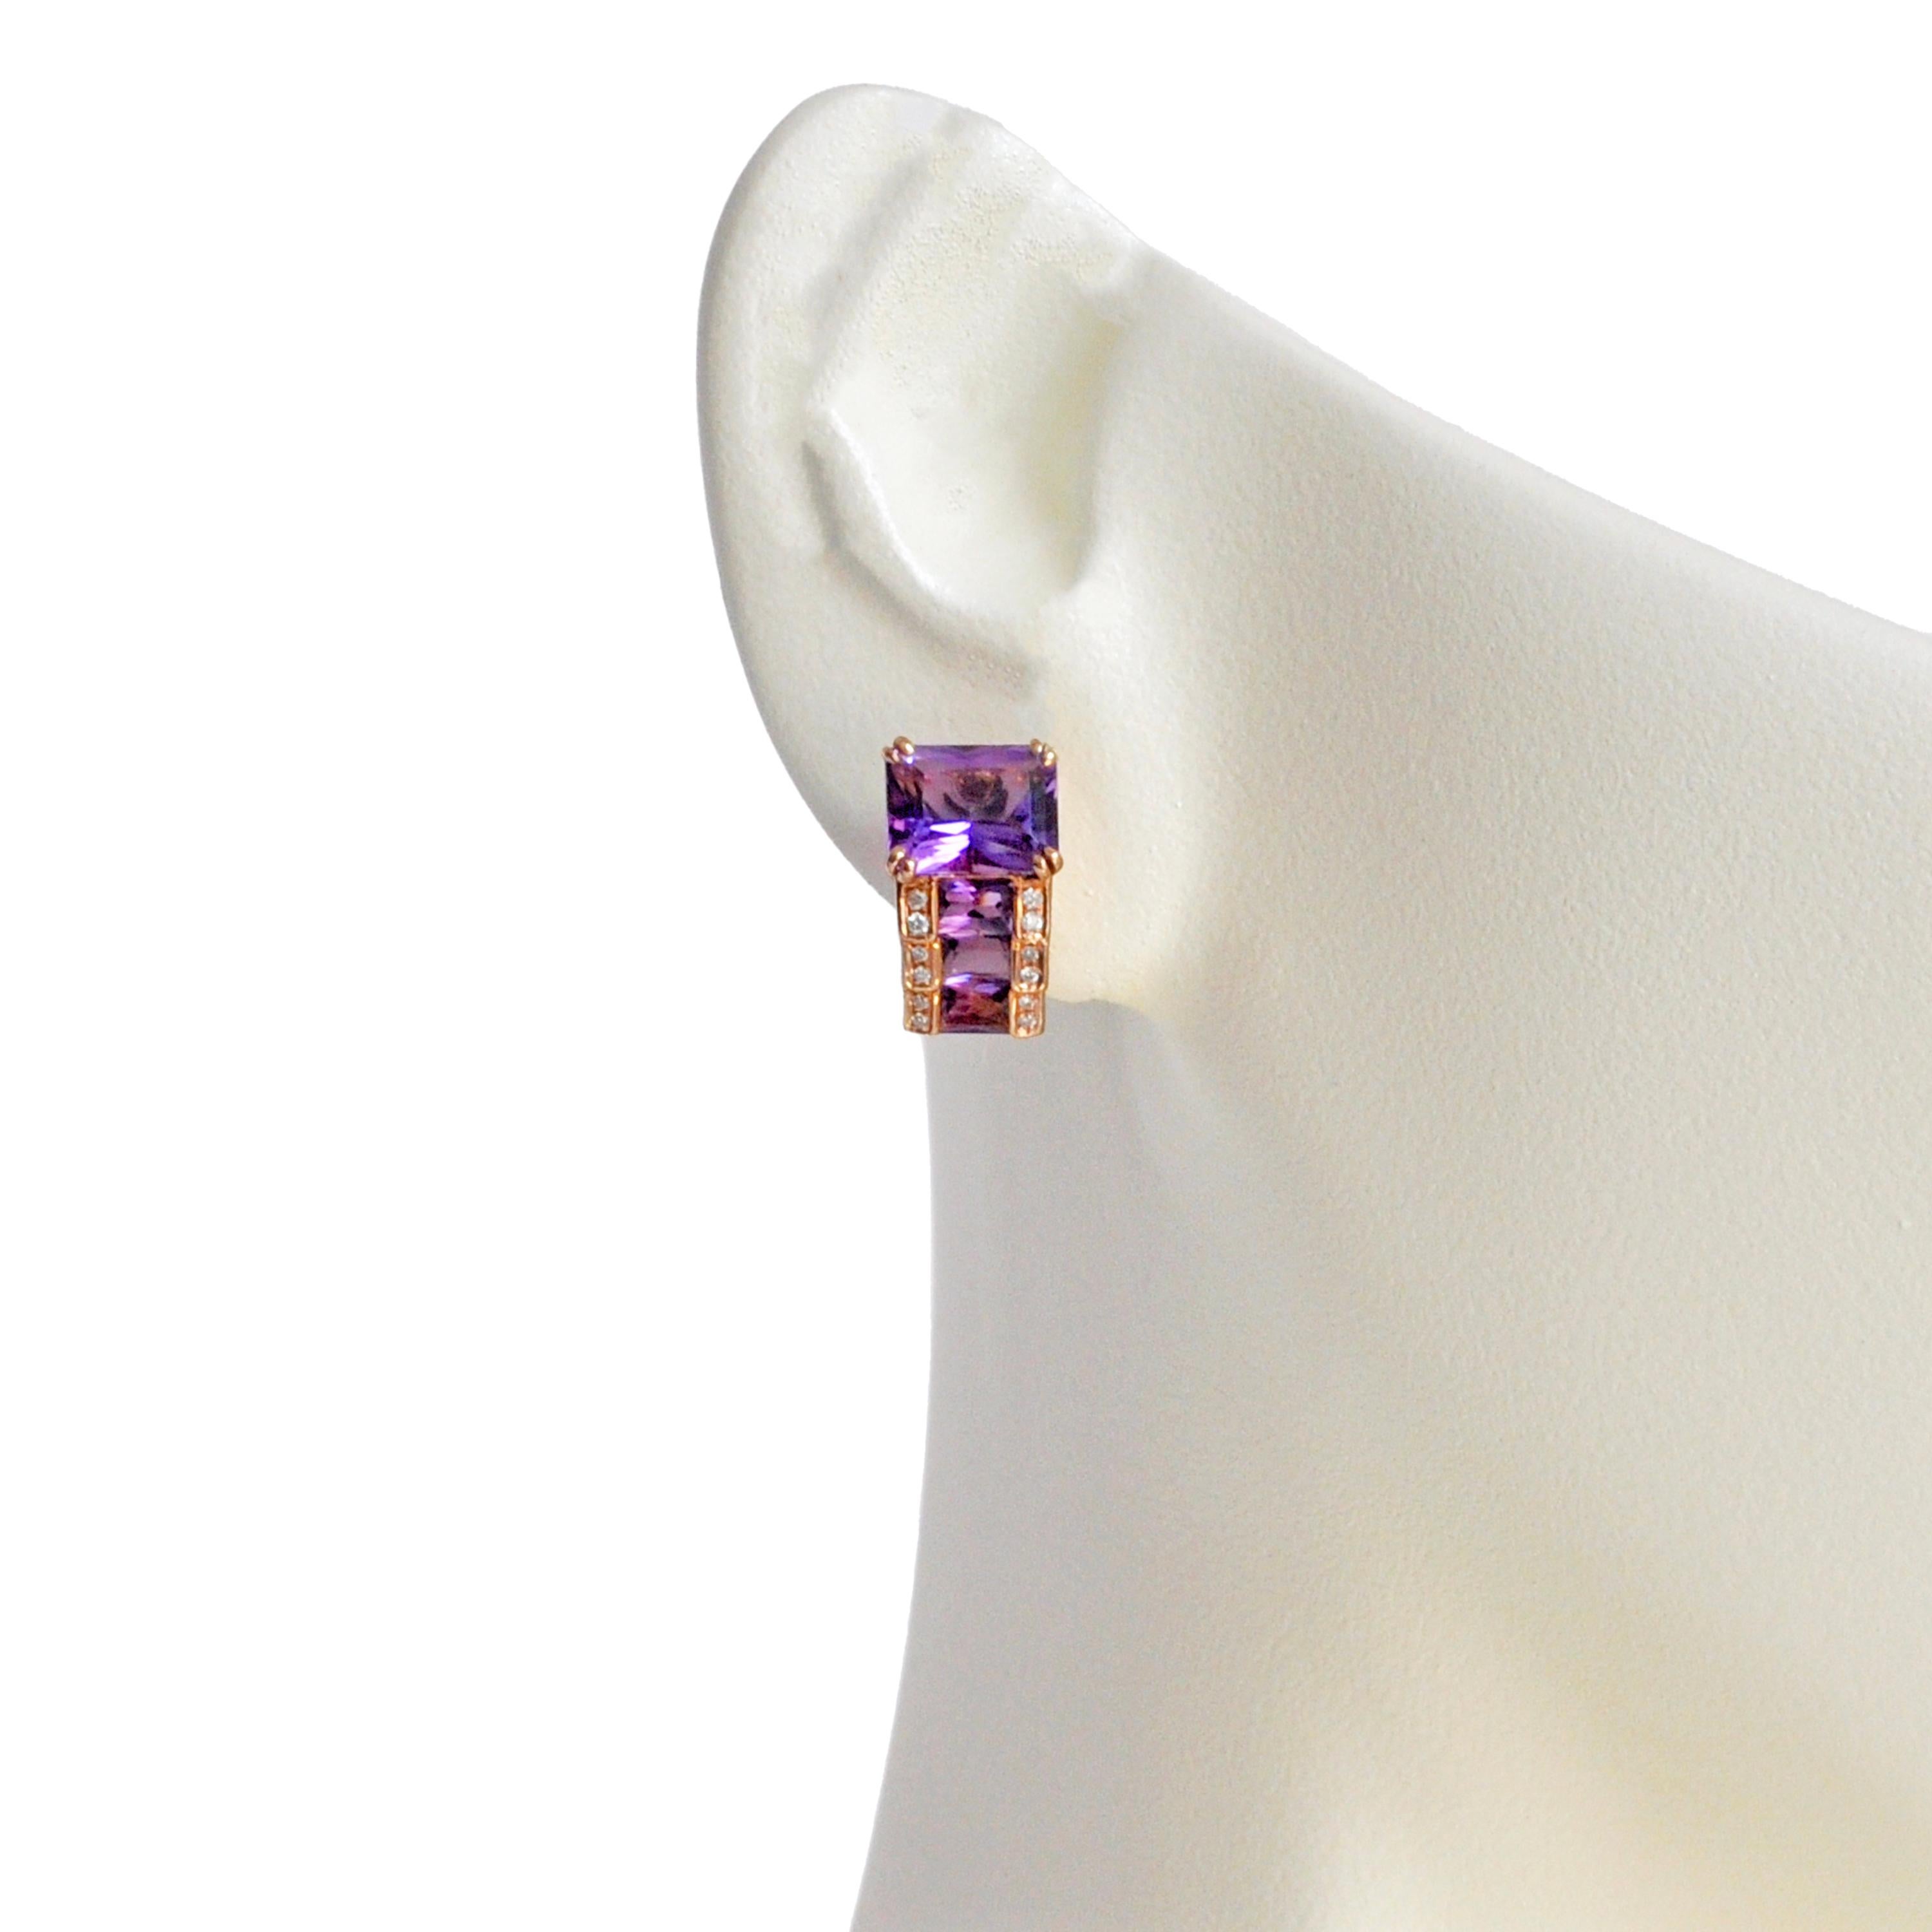 14 karat rose gold amethyst step design stylish stud earrings

A perfect blend of elegance and sophistication, these exquisite amethyst earrings are absolutely gorgeous.

These earrings feature a stunning octagon-cut amethyst stone at the center,